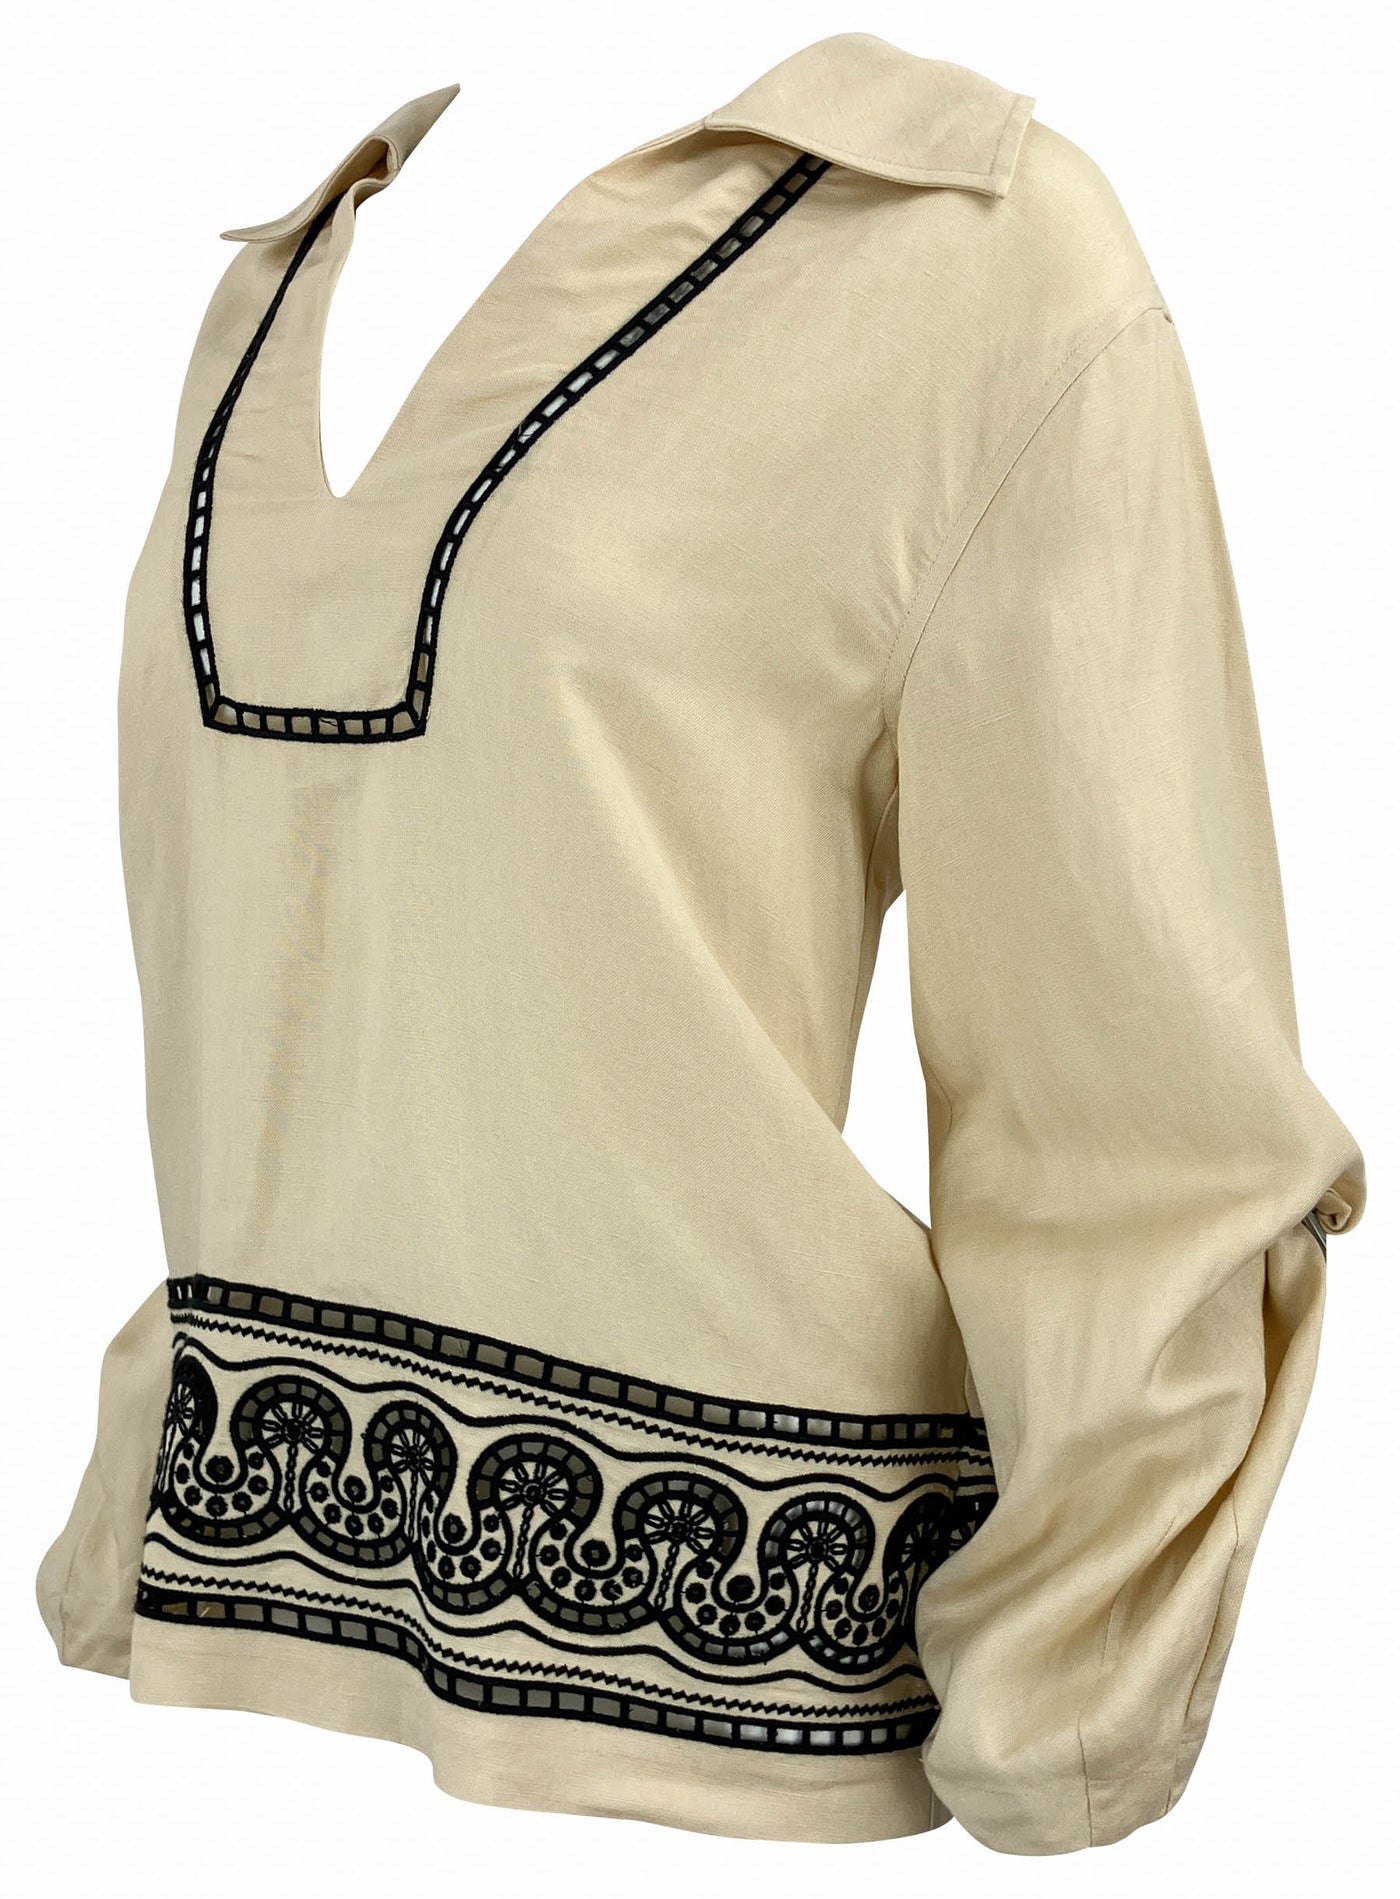 Jonathan Simkhai Abel Eyelet Embroidery Linen Blend Top in Beige and Black - Discounts on Jonathan Simkhai at UAL